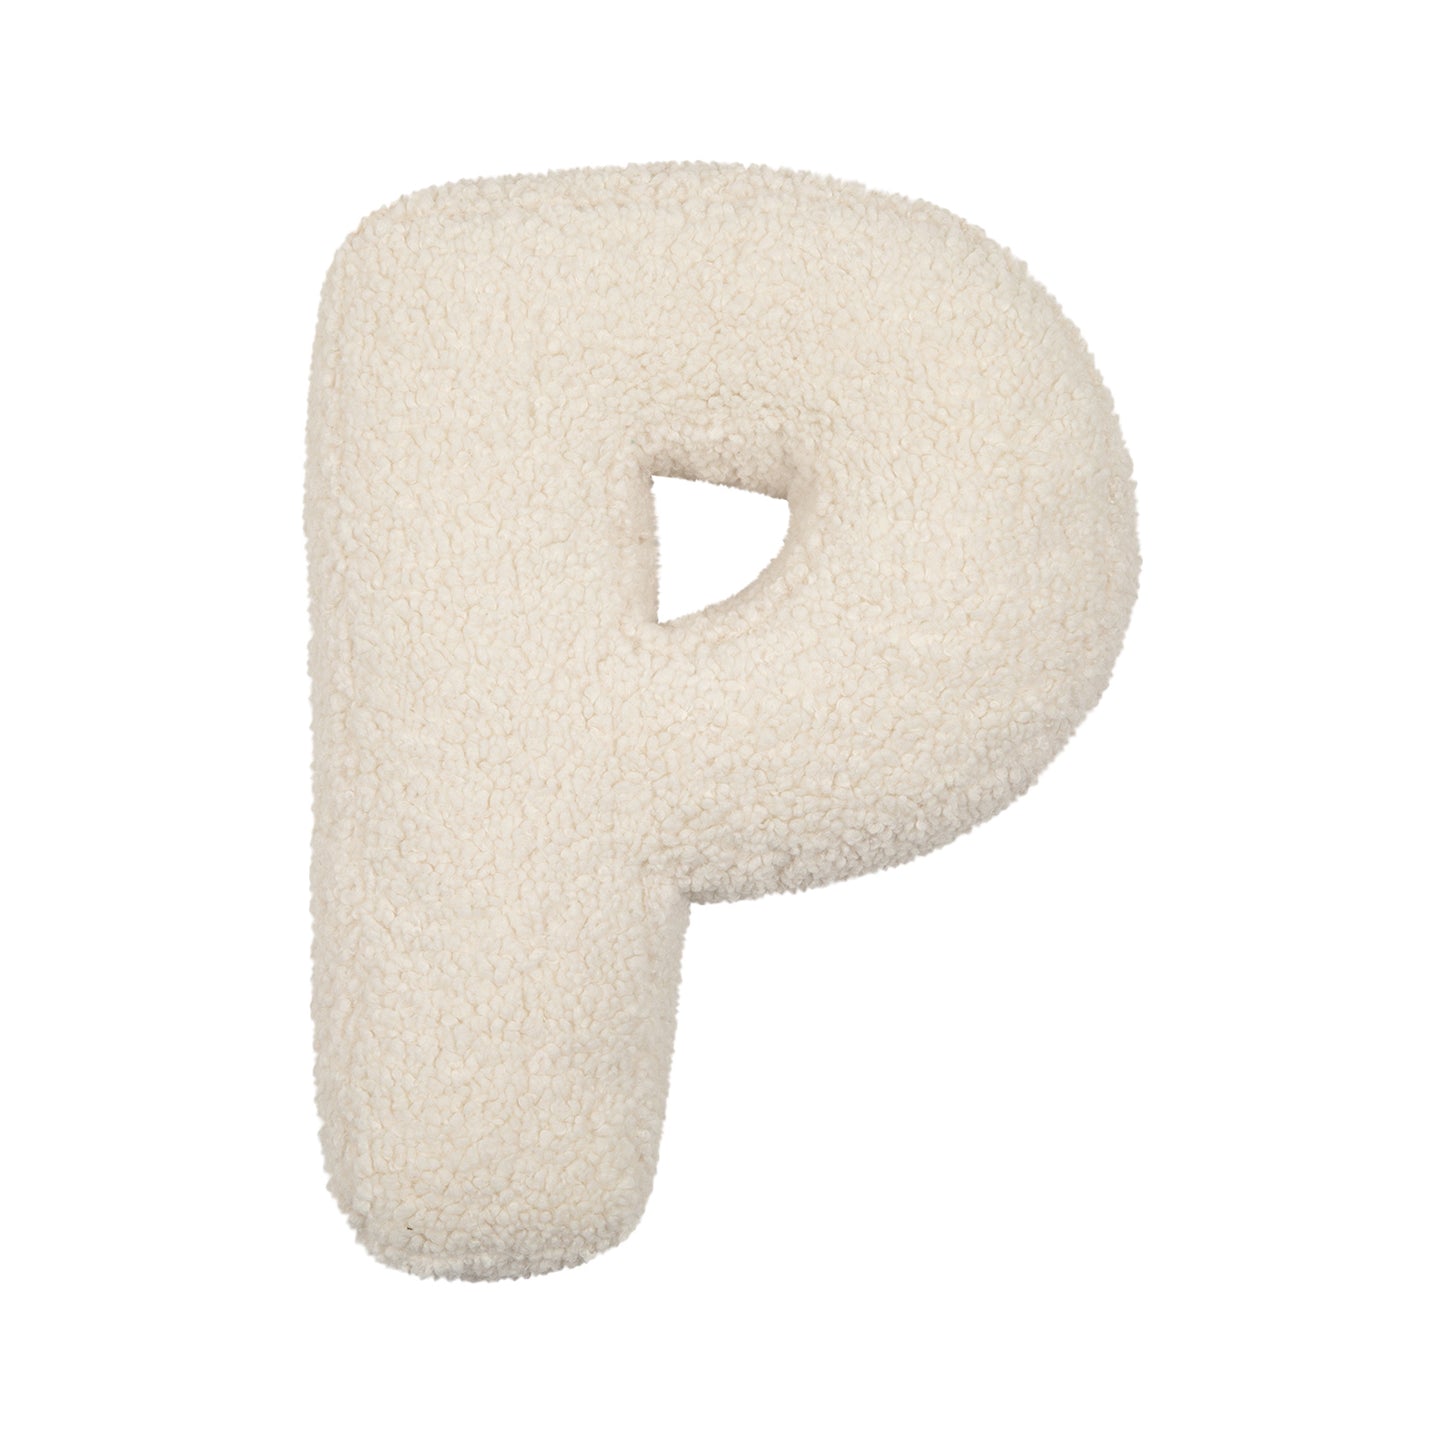 boucle letter cushion P teddy pillow by bettys home on white background 